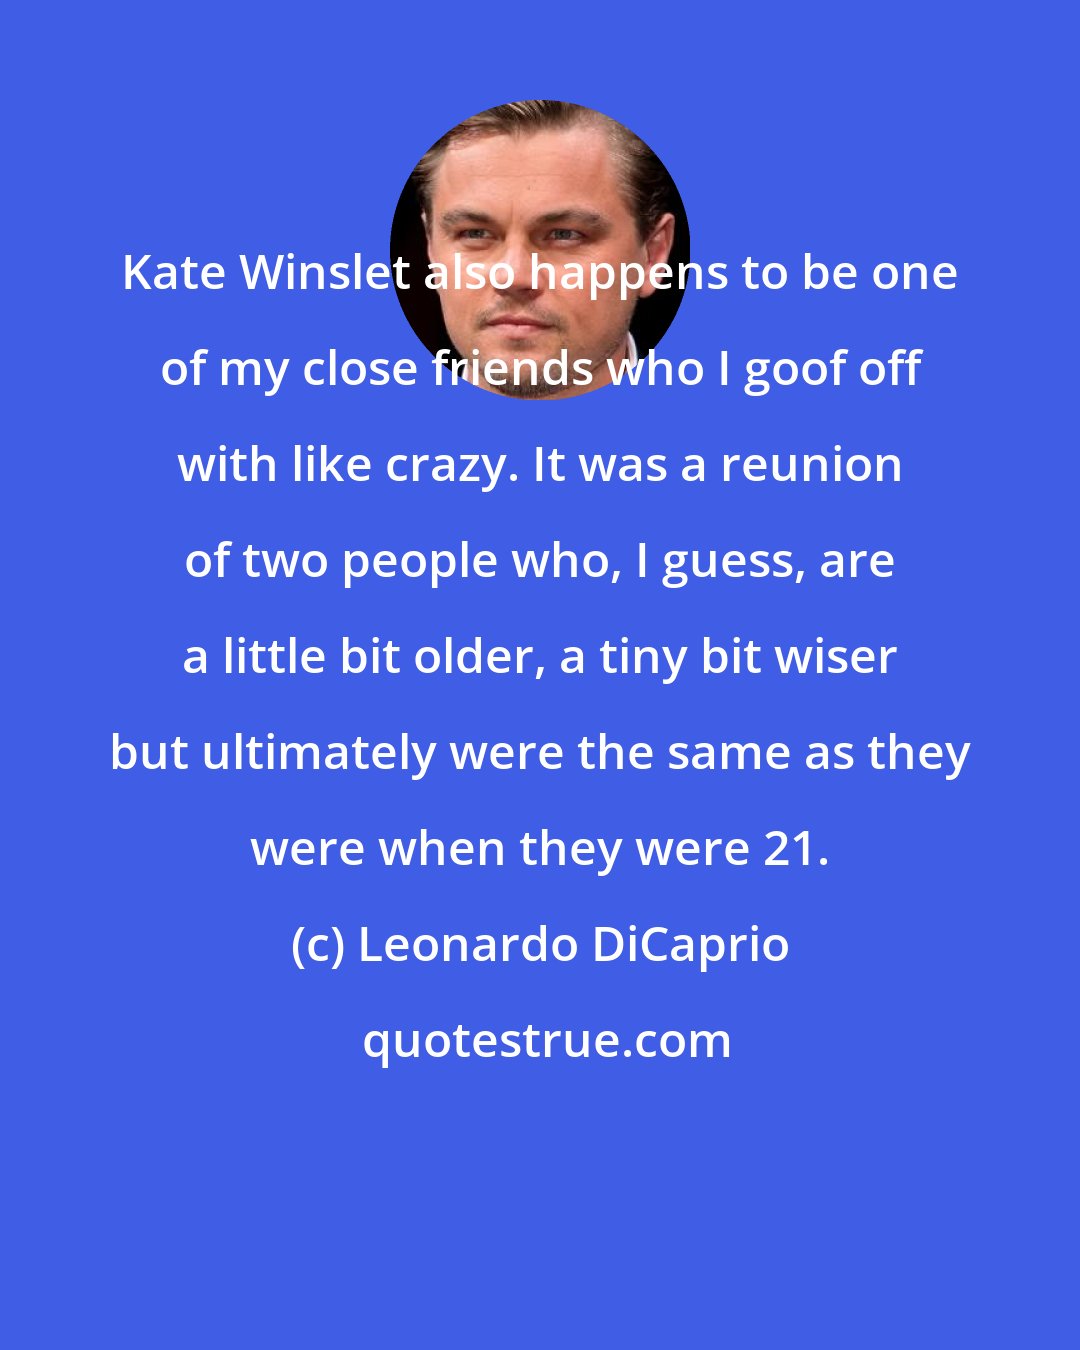 Leonardo DiCaprio: Kate Winslet also happens to be one of my close friends who I goof off with like crazy. It was a reunion of two people who, I guess, are a little bit older, a tiny bit wiser but ultimately were the same as they were when they were 21.